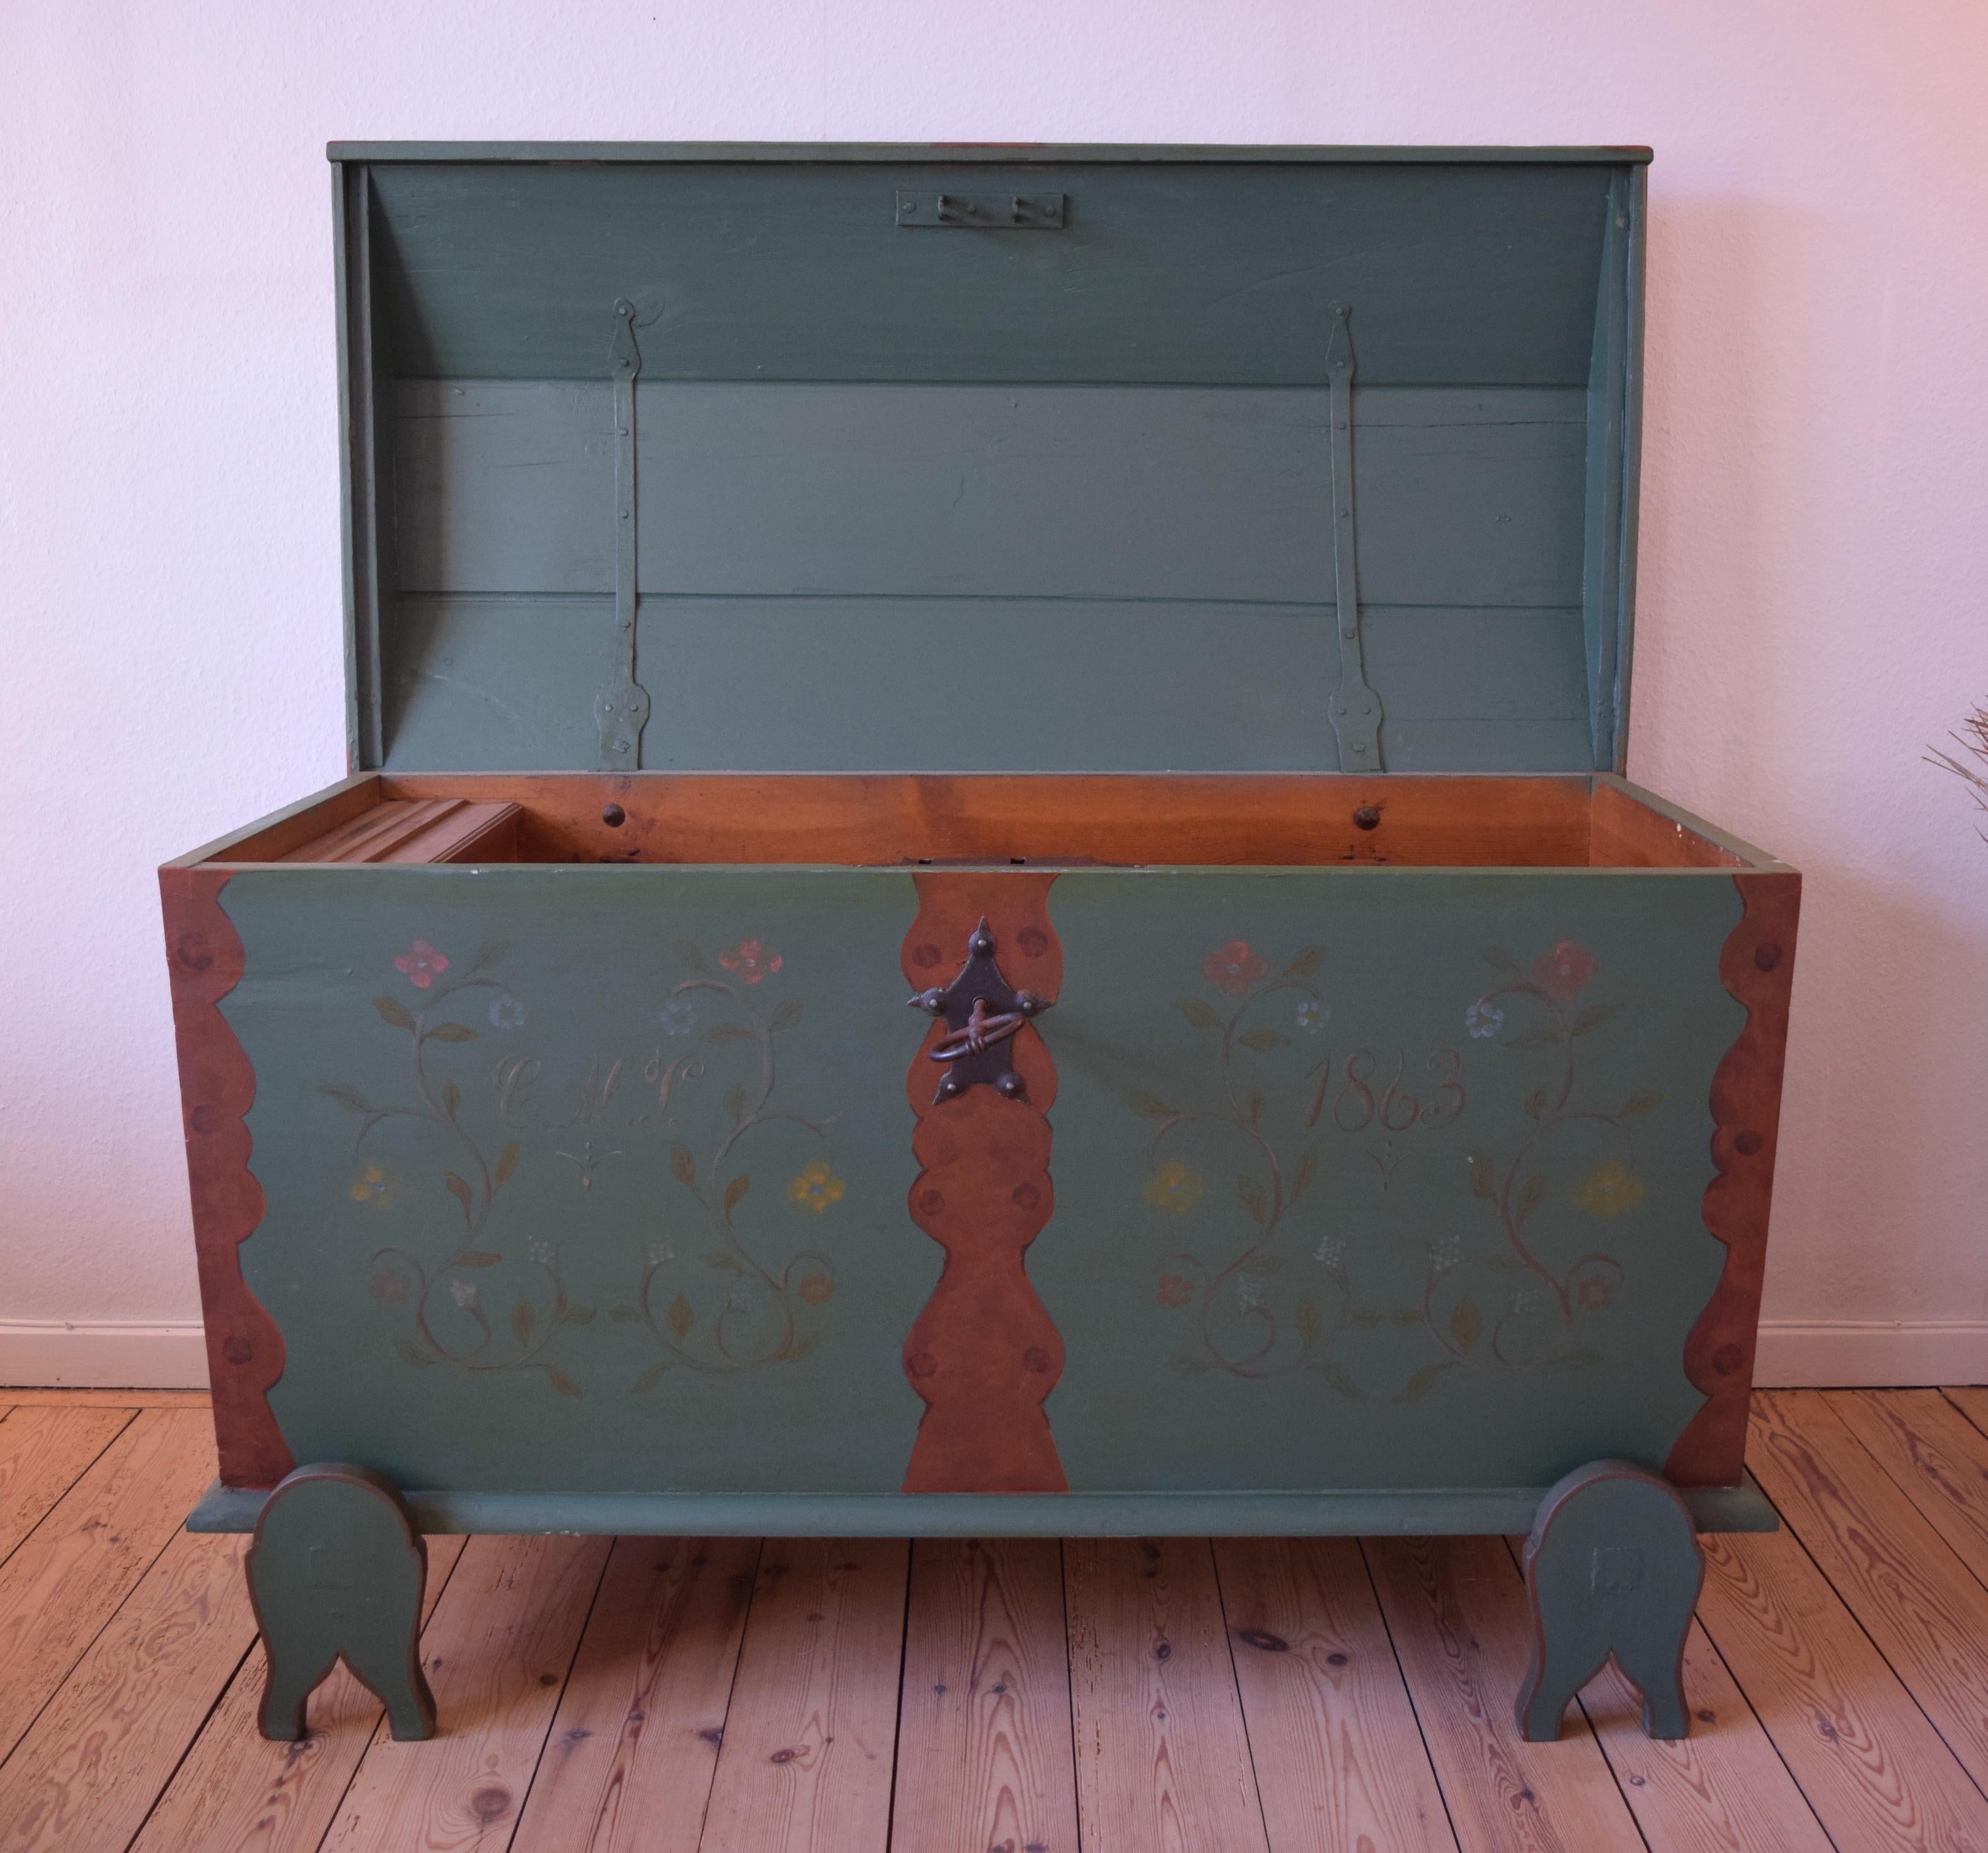 Large Danish 19th century dowry chest. On the front it is marked with the owner's initials, and the year 1863 with flowers in the background. The floral design represents the 